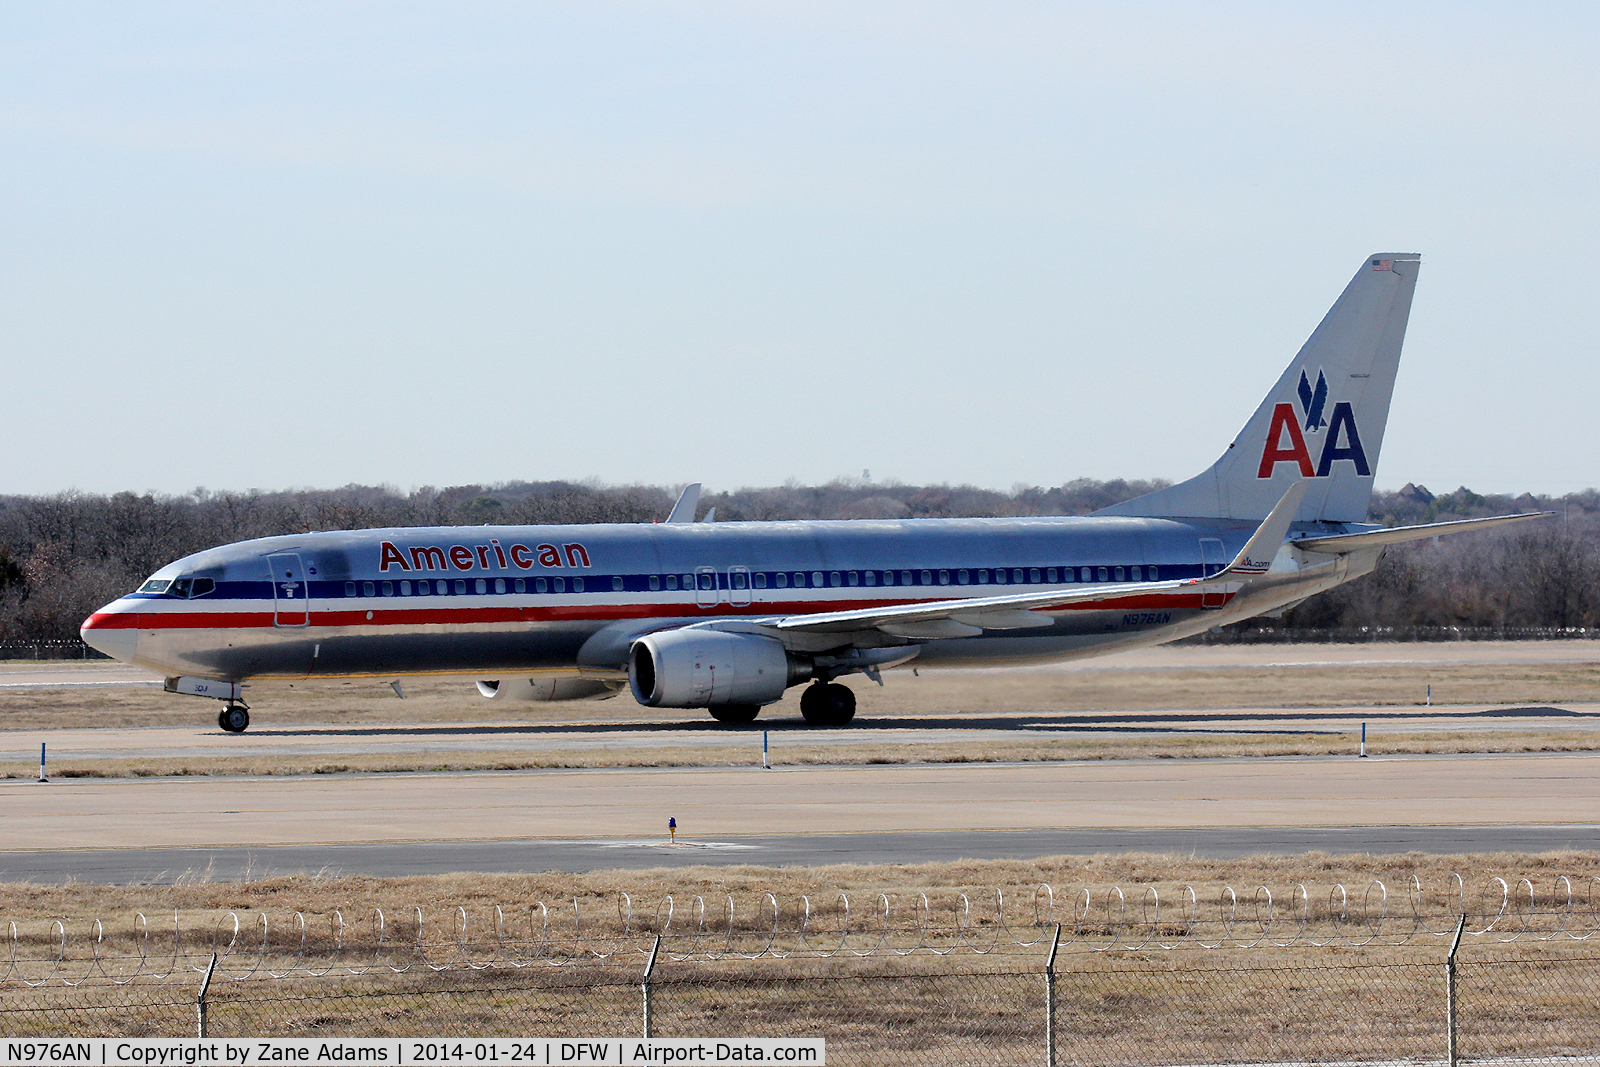 N976AN, 2001 Boeing 737-823 C/N 30099, American Airlines at DFW Airport